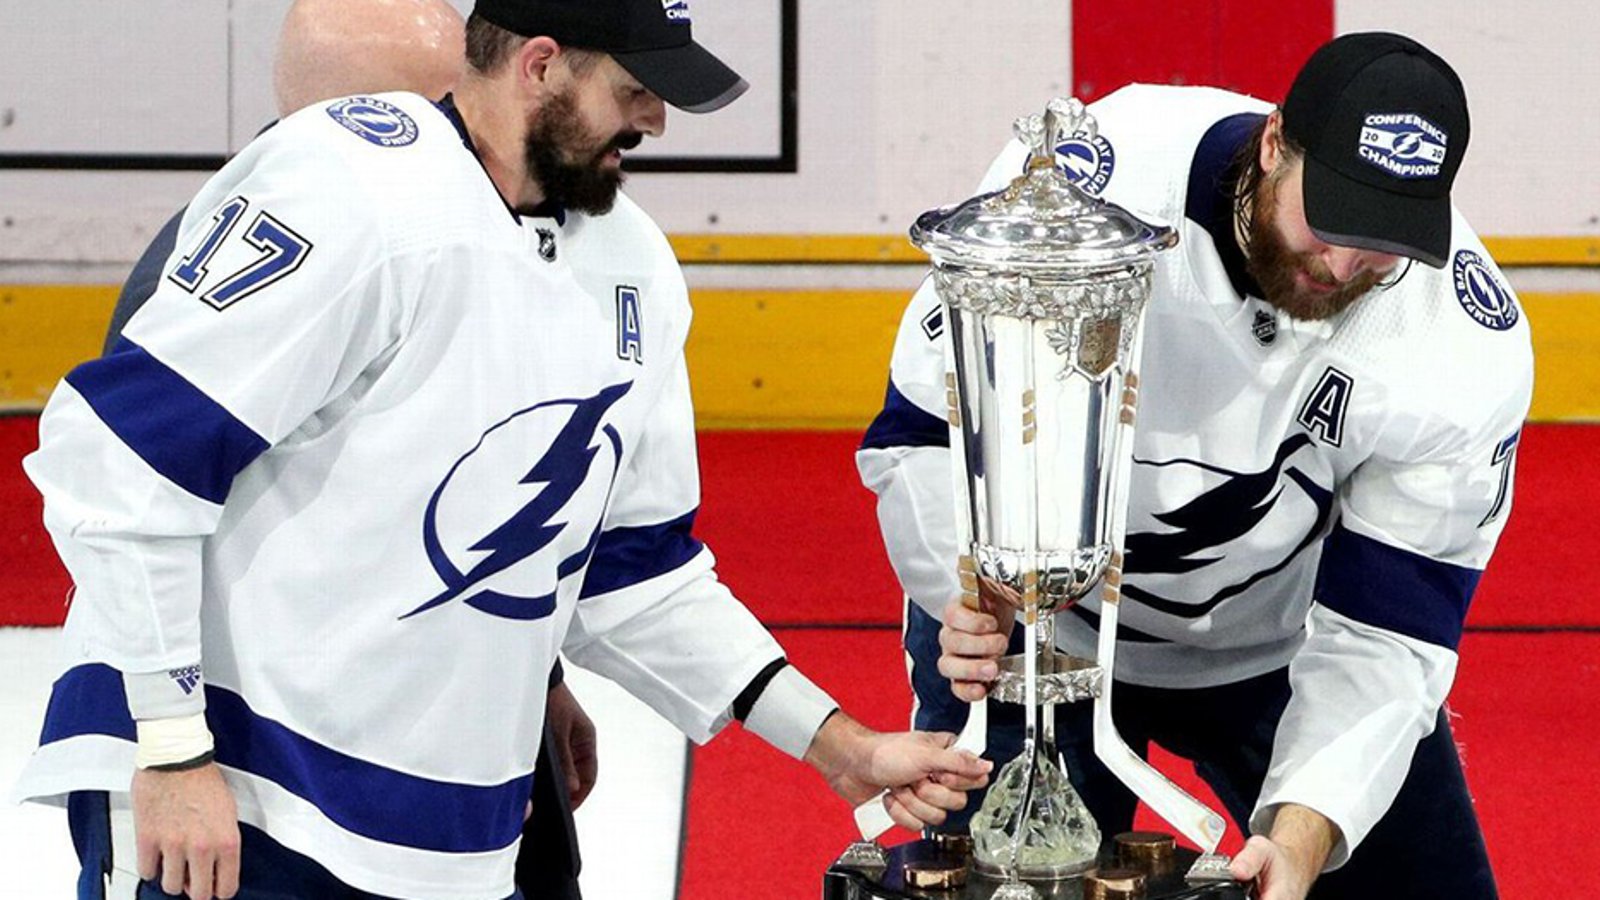 NHL confirms no one will win the Campbell Bowl or the Prince of Wales trophy this season